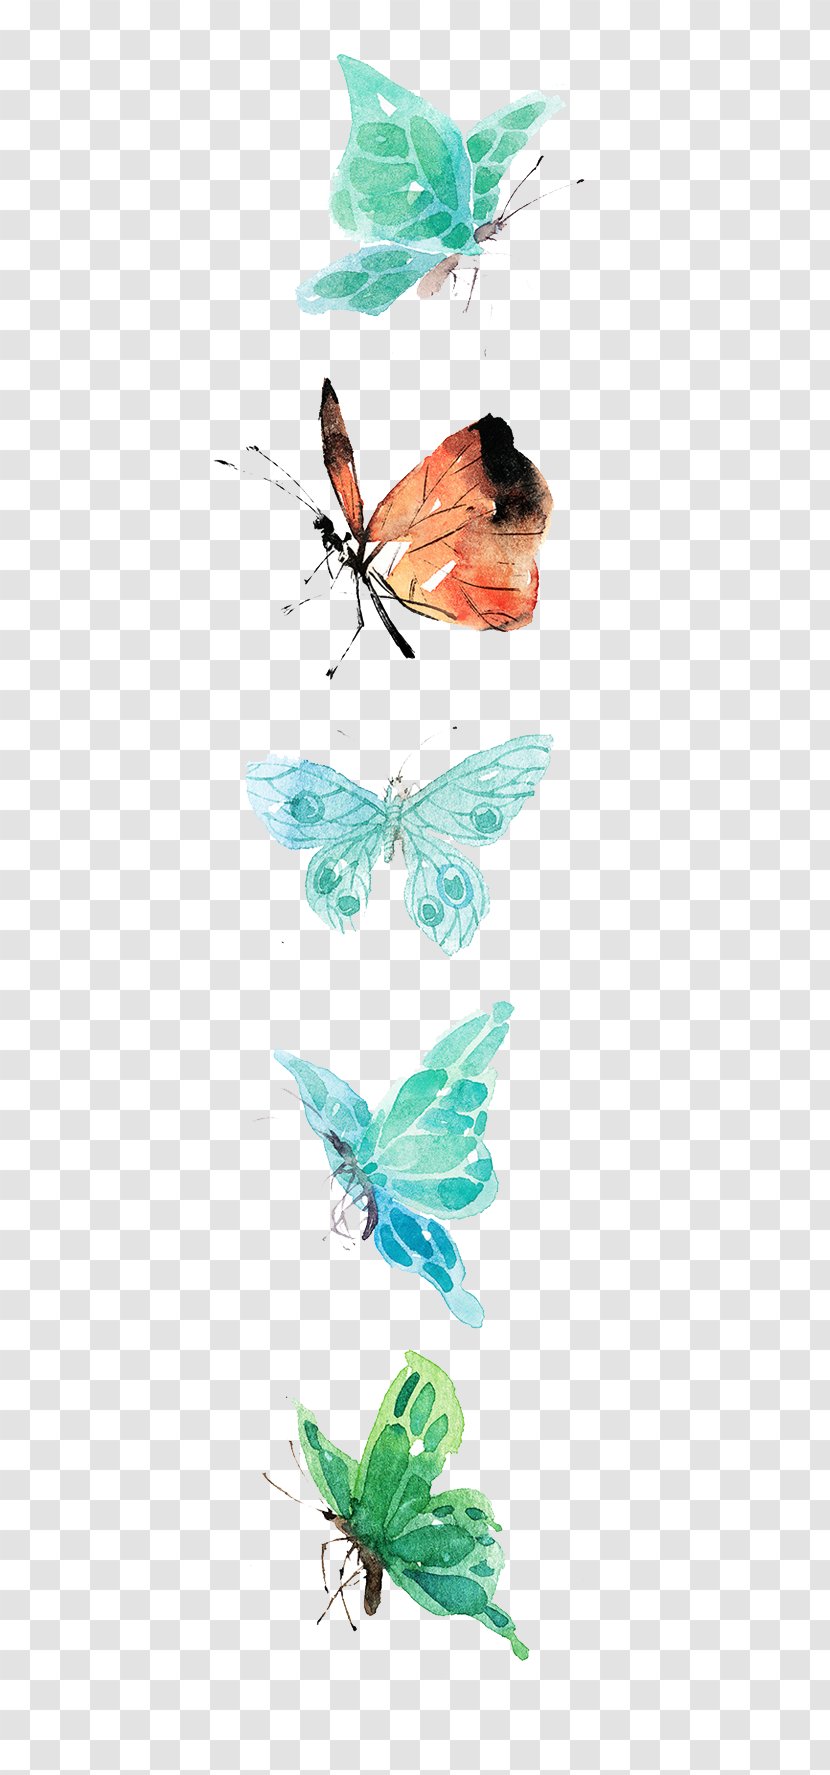 Watercolor Painting Drawing Graphic Design Illustration - Cartoon - Butterfly Transparent PNG